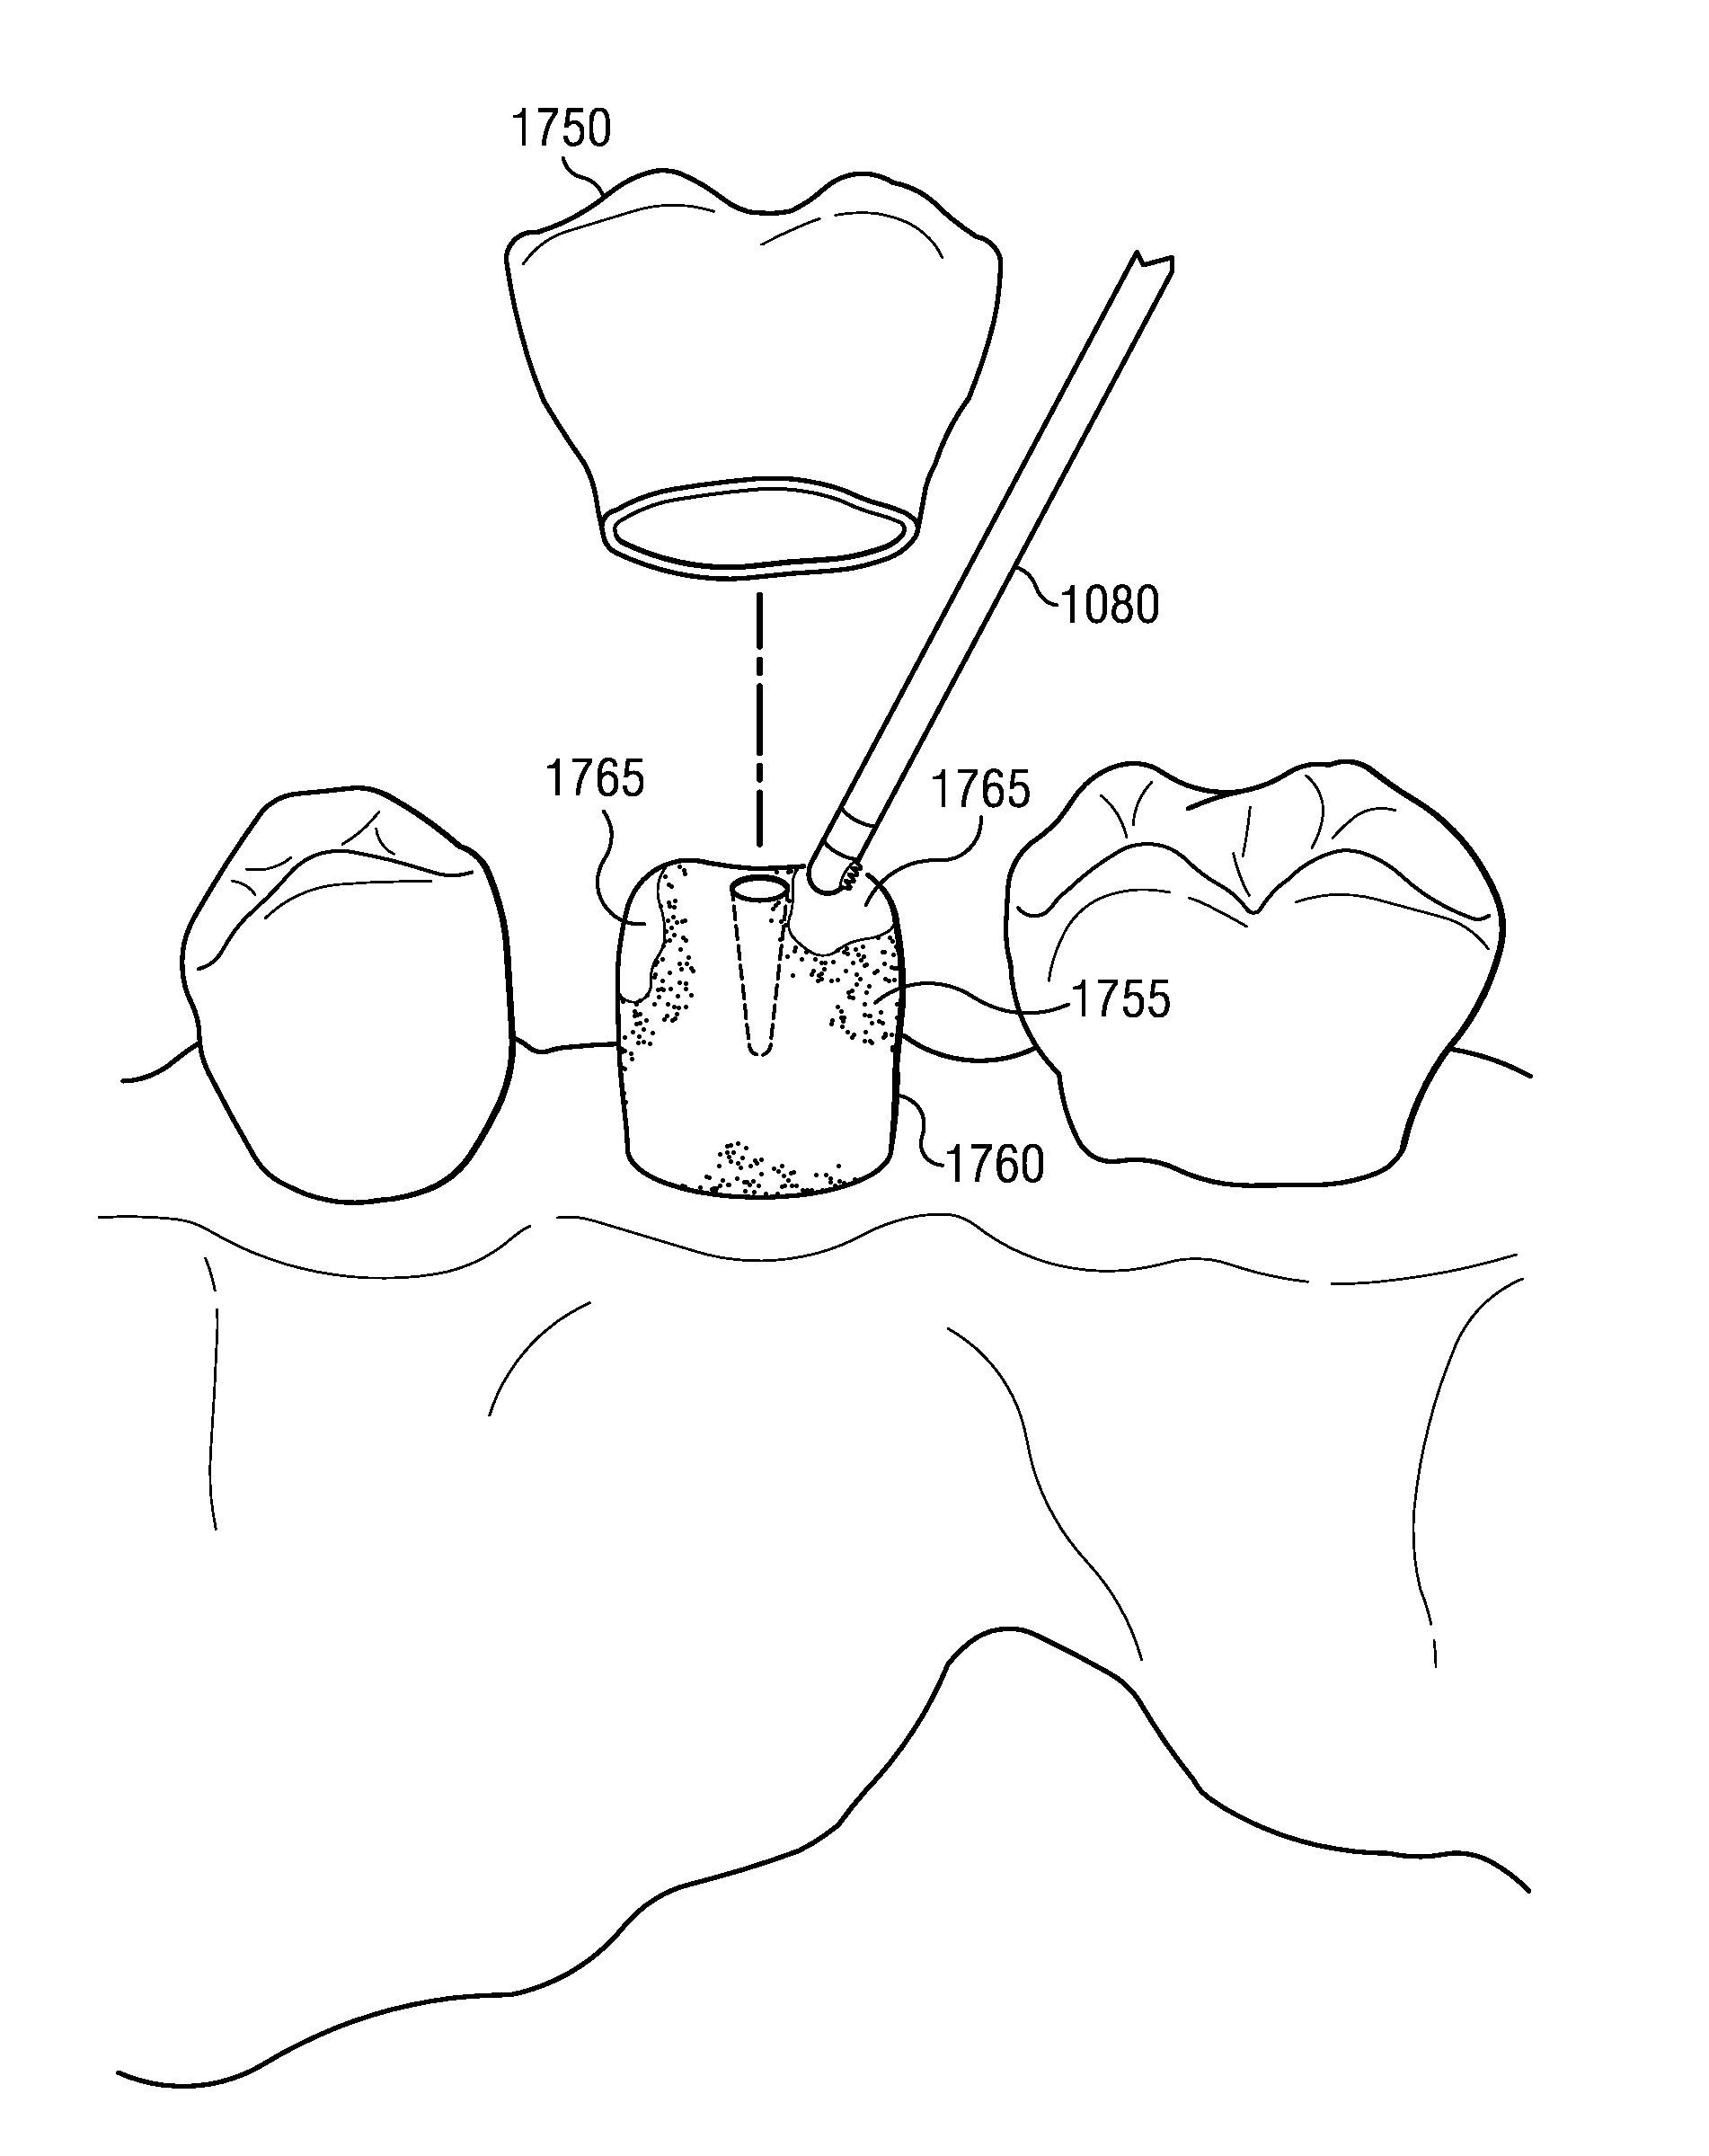 Electrosurgical system and method for treating hard body tissue